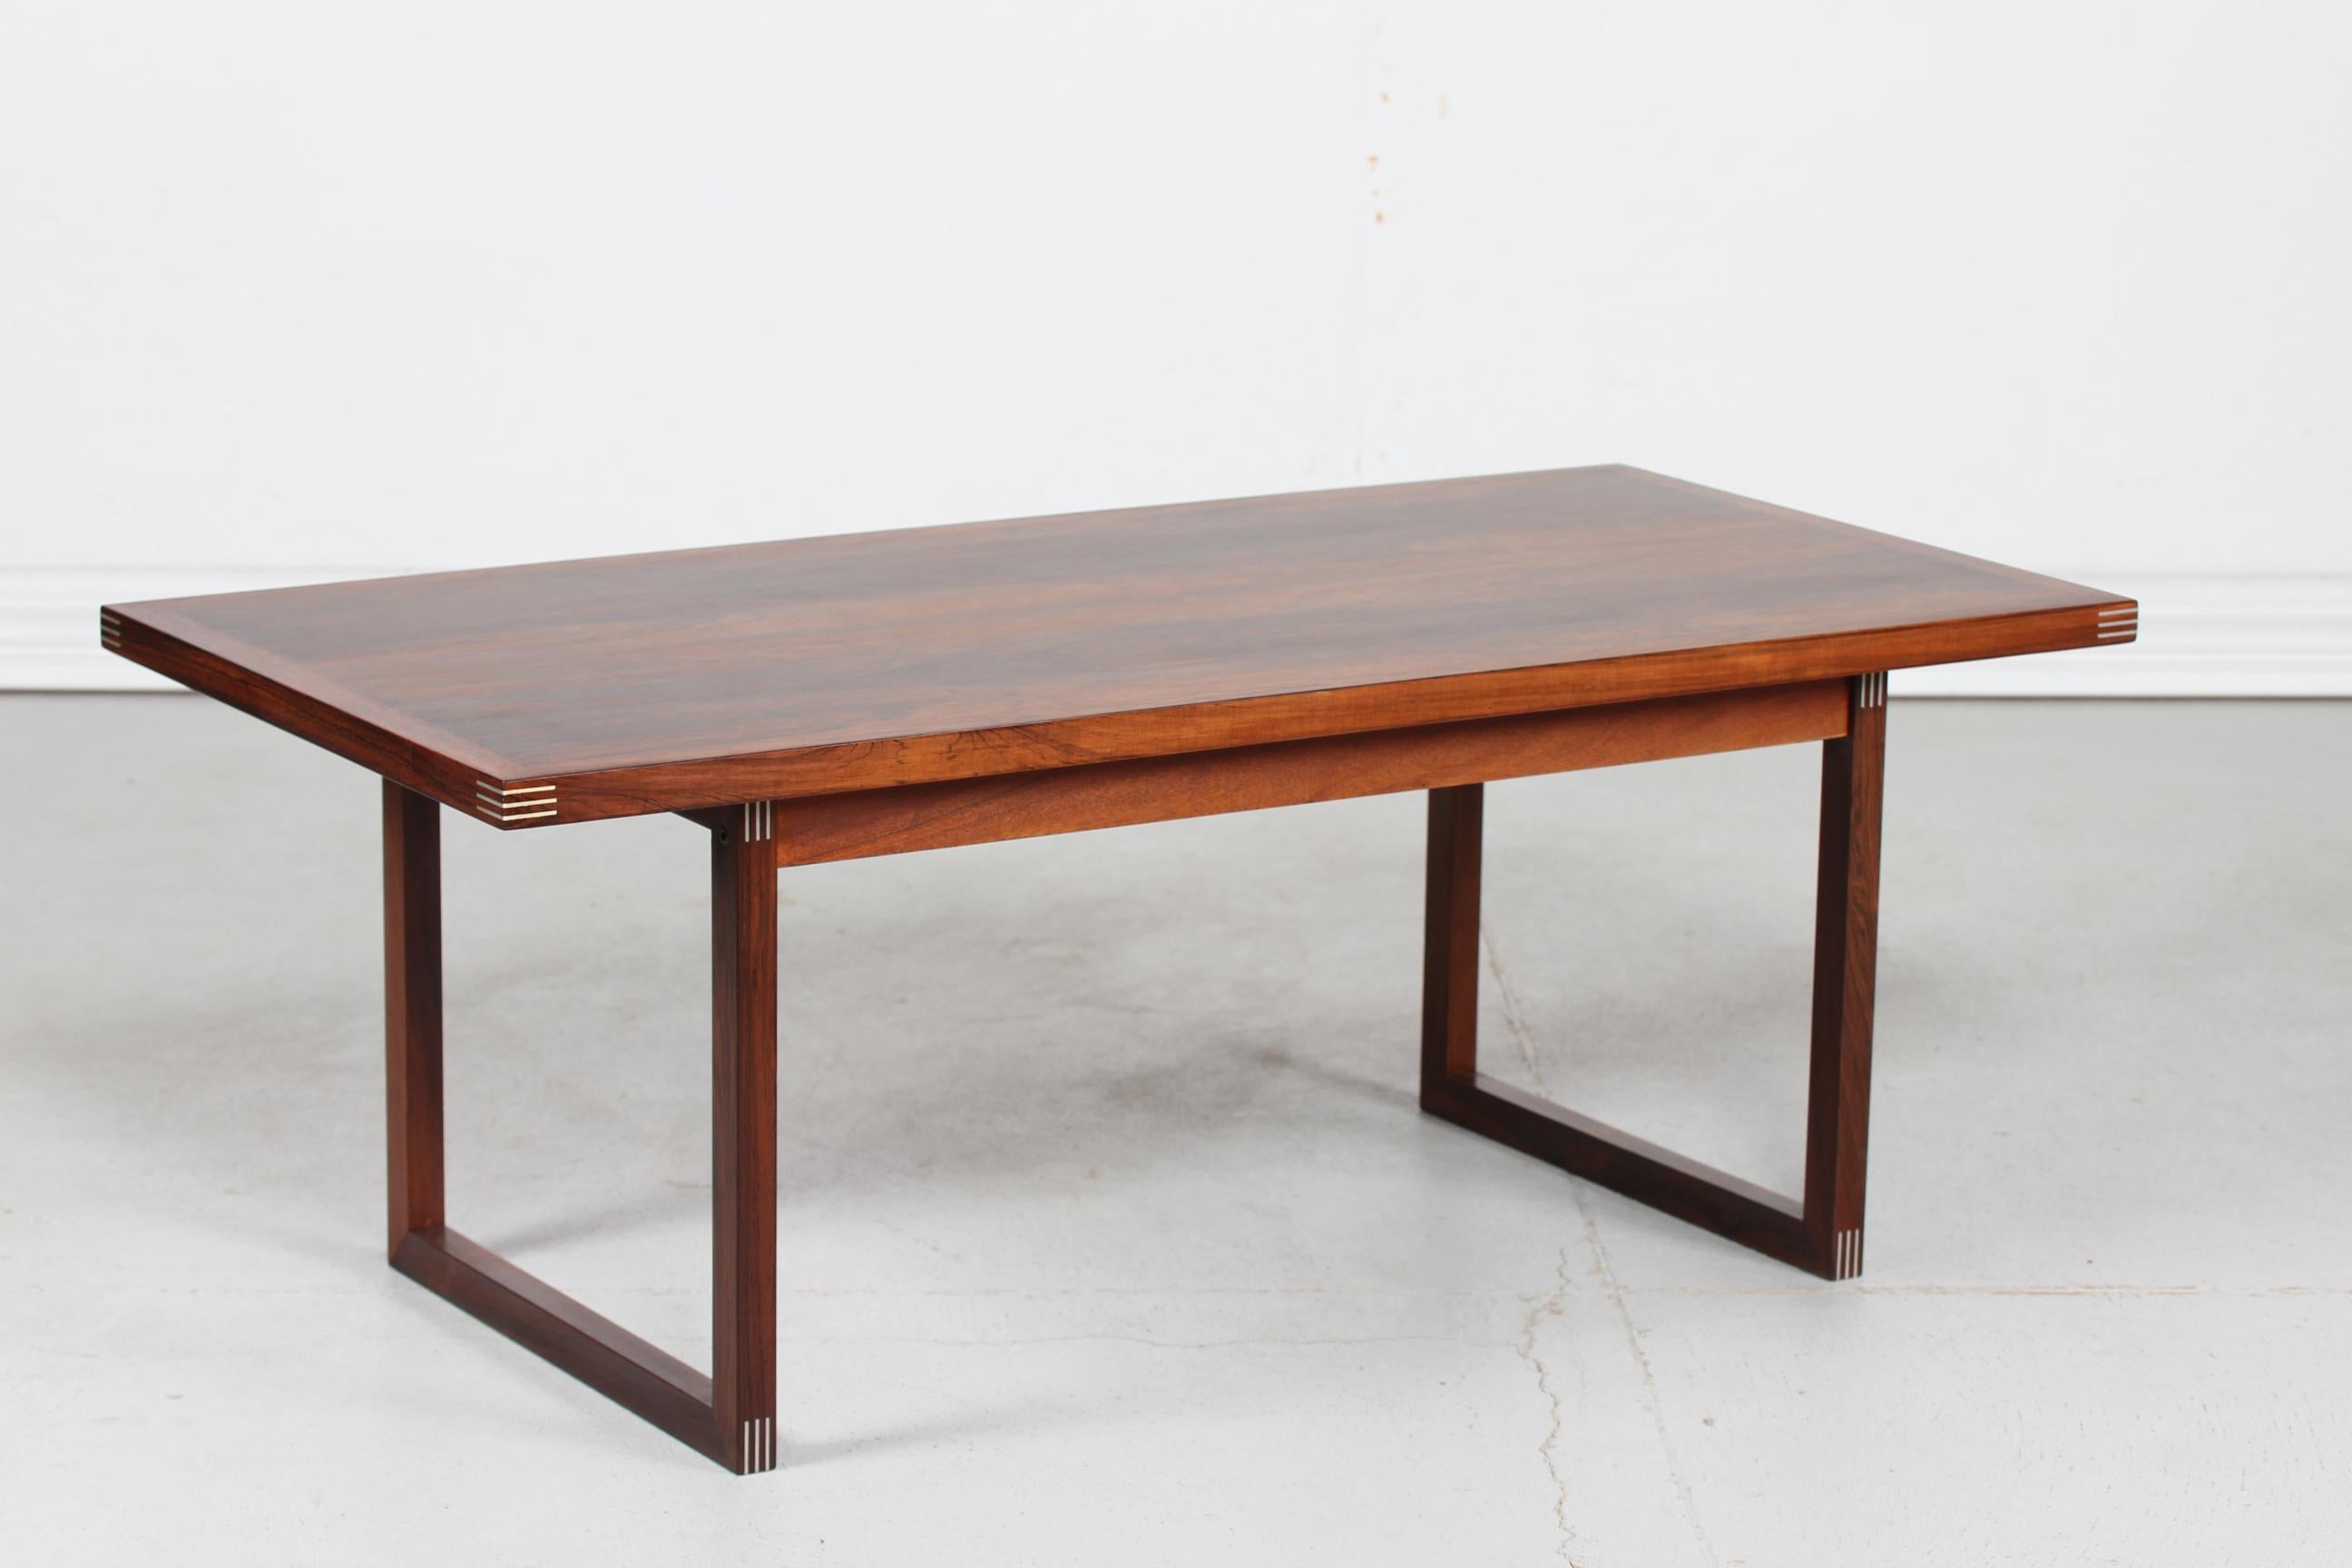 Danish modern sleight leg coffee table made of rosewood.
Created by furniture designer Rud Thygesen (1932-) and manufactured by Heltborg Møbler in Denmark 1970s 

The table is made of rosewood with inlaid aluminium and remains in very nice